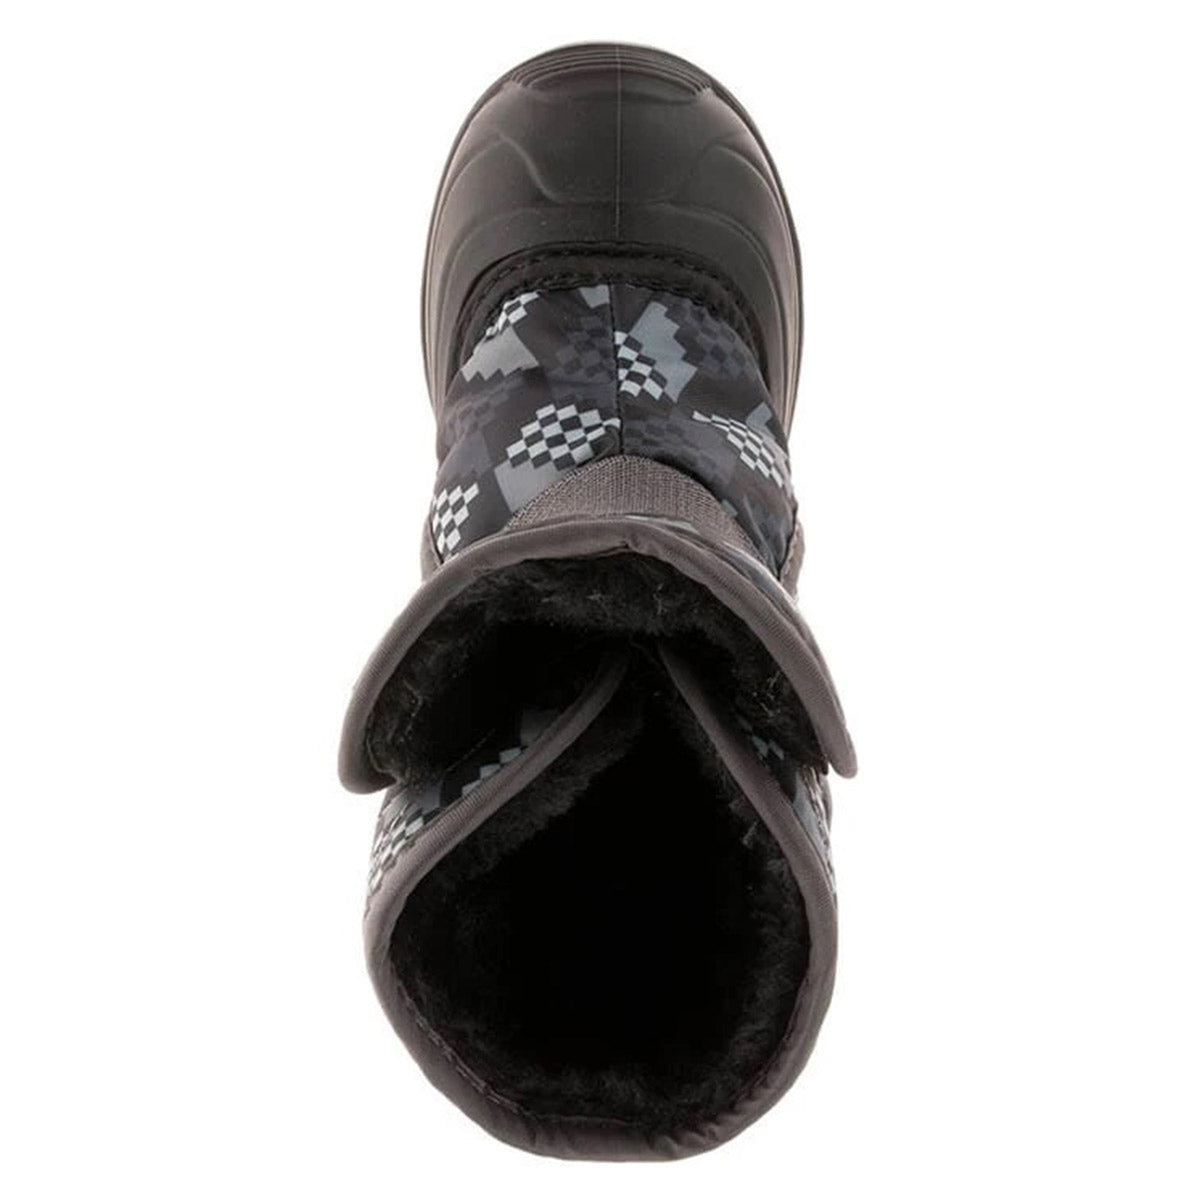 Top view of a Kamik SNOWBUG 4 BLACK/CHARCOAL patterned toddler snow boot with fur lining.